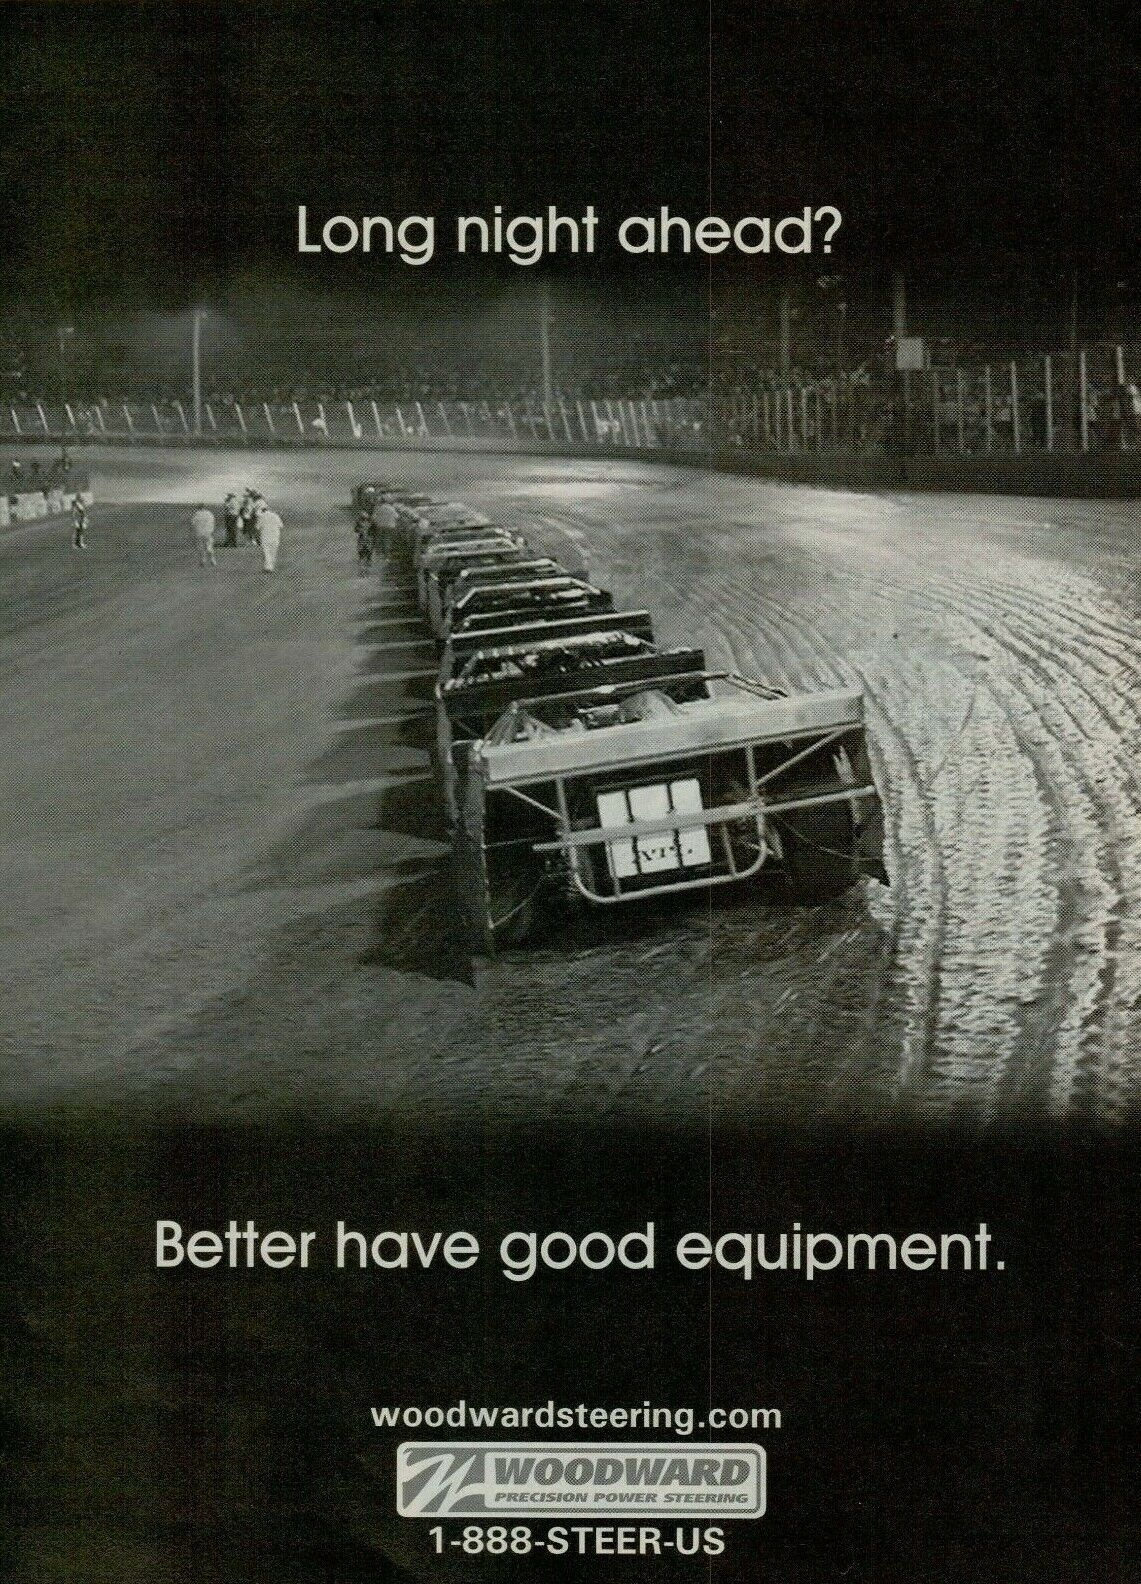 2006 Woodward Precision Power Steering Dirt Track Oval Racing Vintage Print Ad